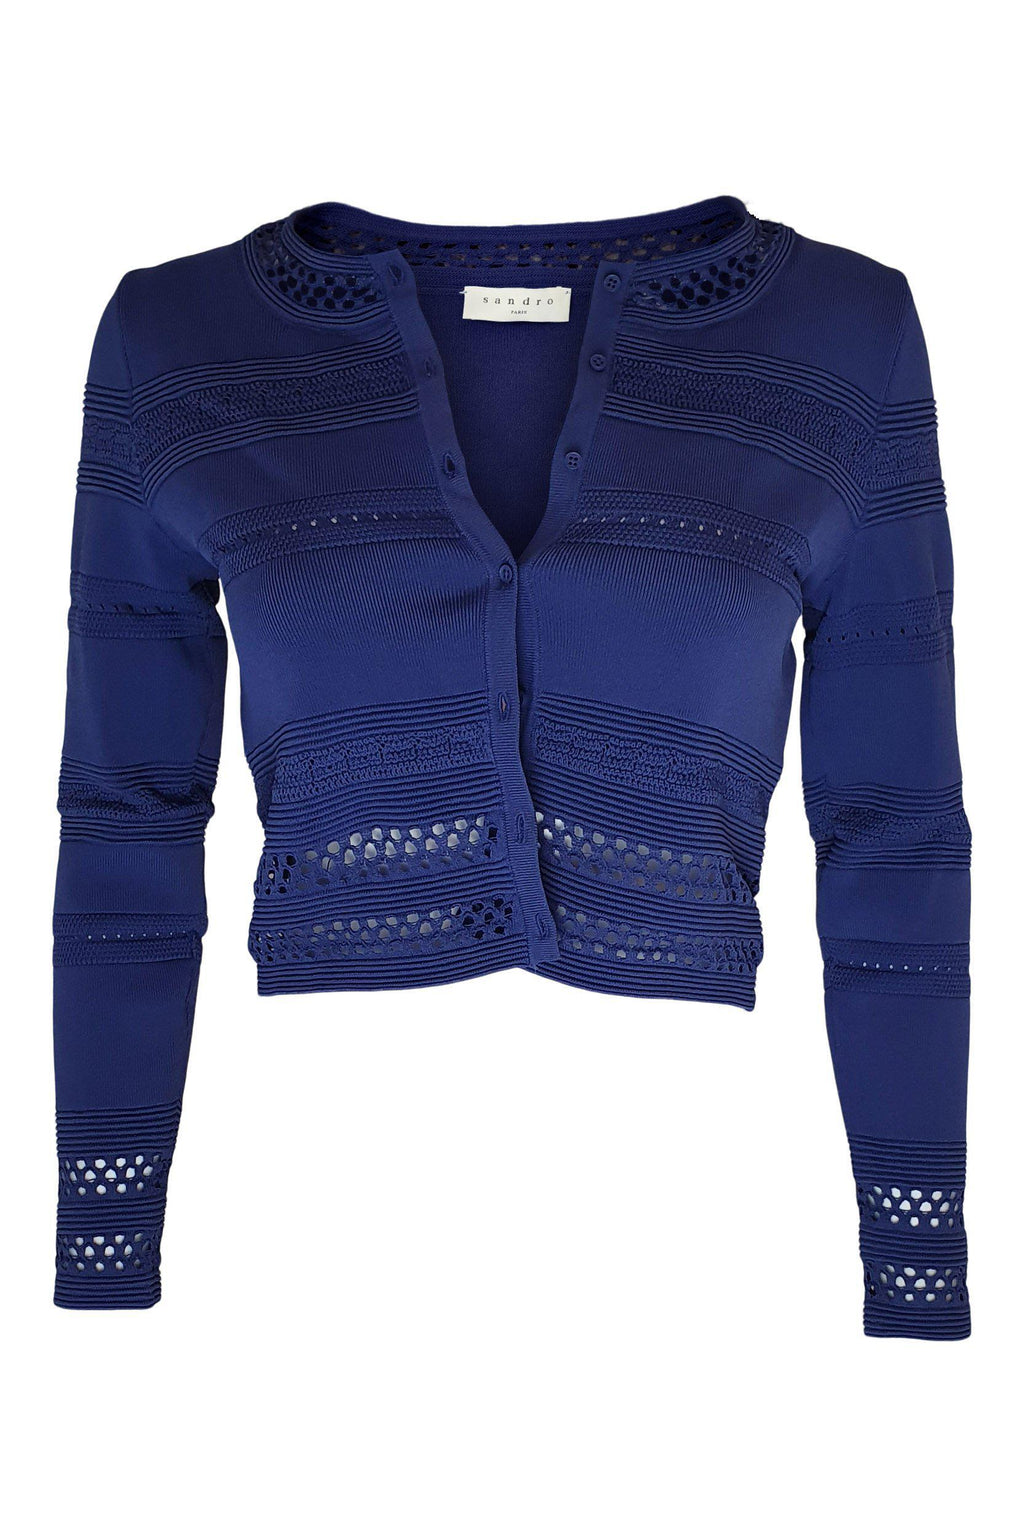 SANDRO Egrantine Blue Knit Long Sleeved Cropped Cardigan (S)-Sandro-The Freperie